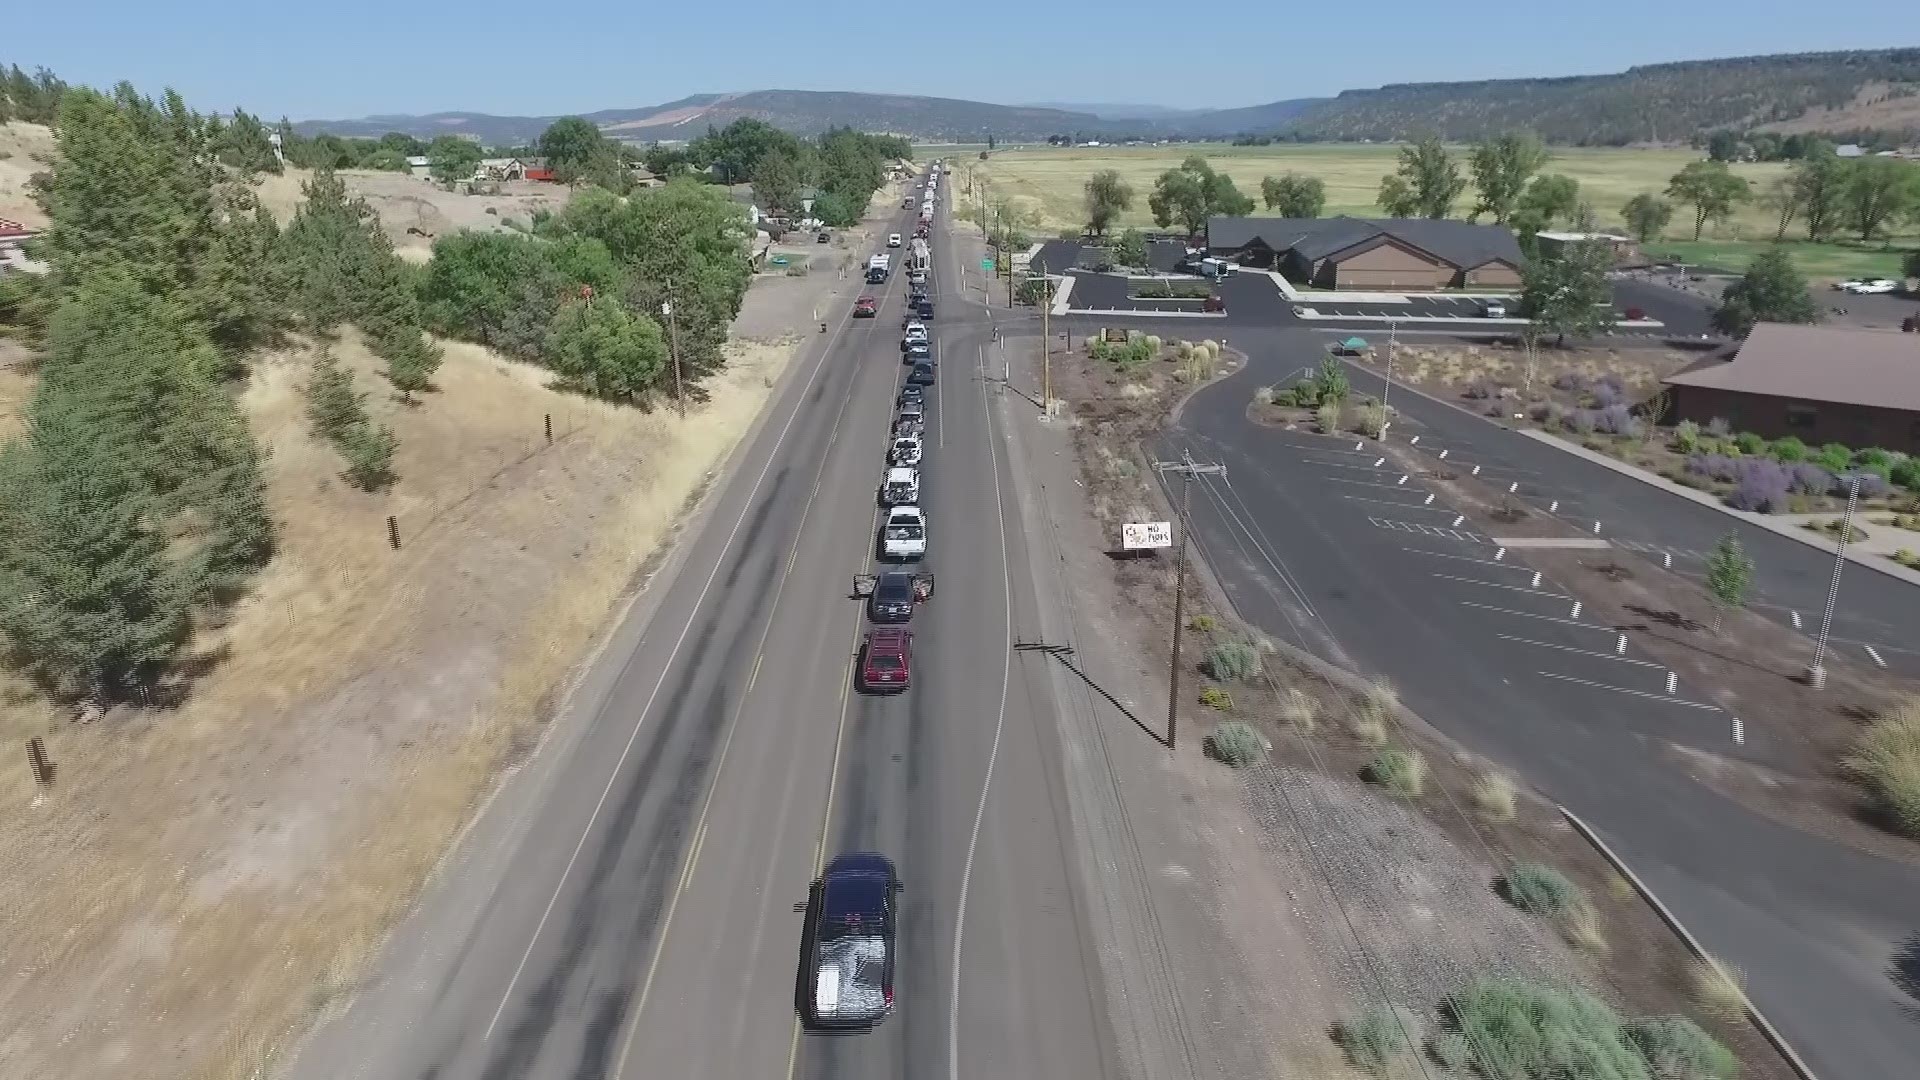 Video from KGW's drone, Fly 8, of the miles-long traffic backup in the Prineville area as people come in for an eclipse festival.